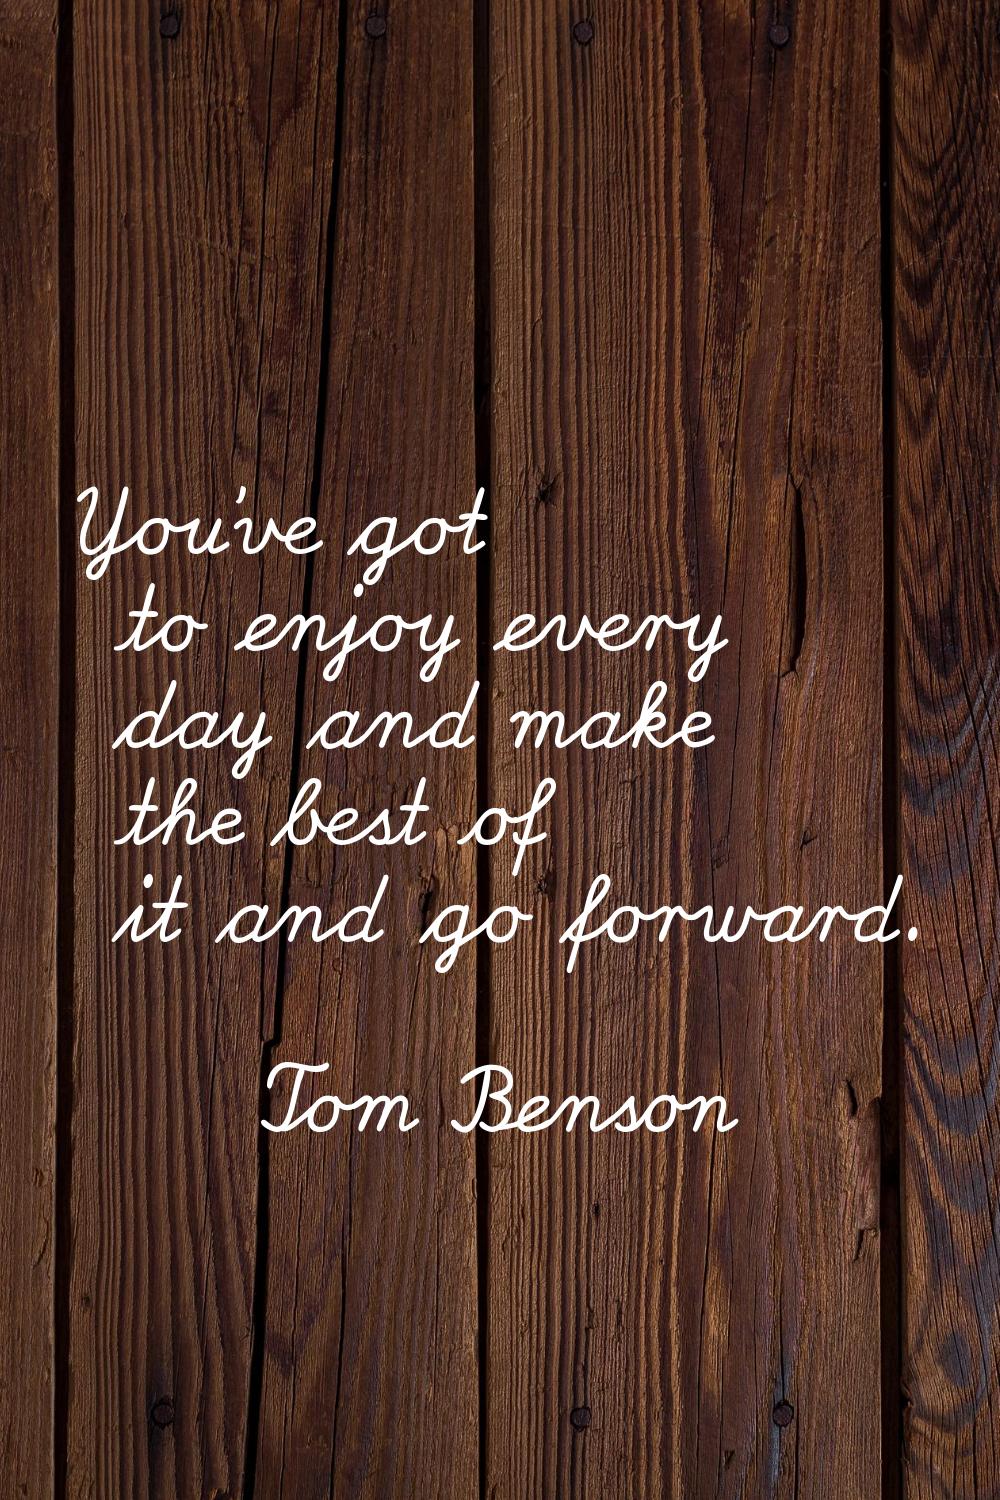 You've got to enjoy every day and make the best of it and go forward.